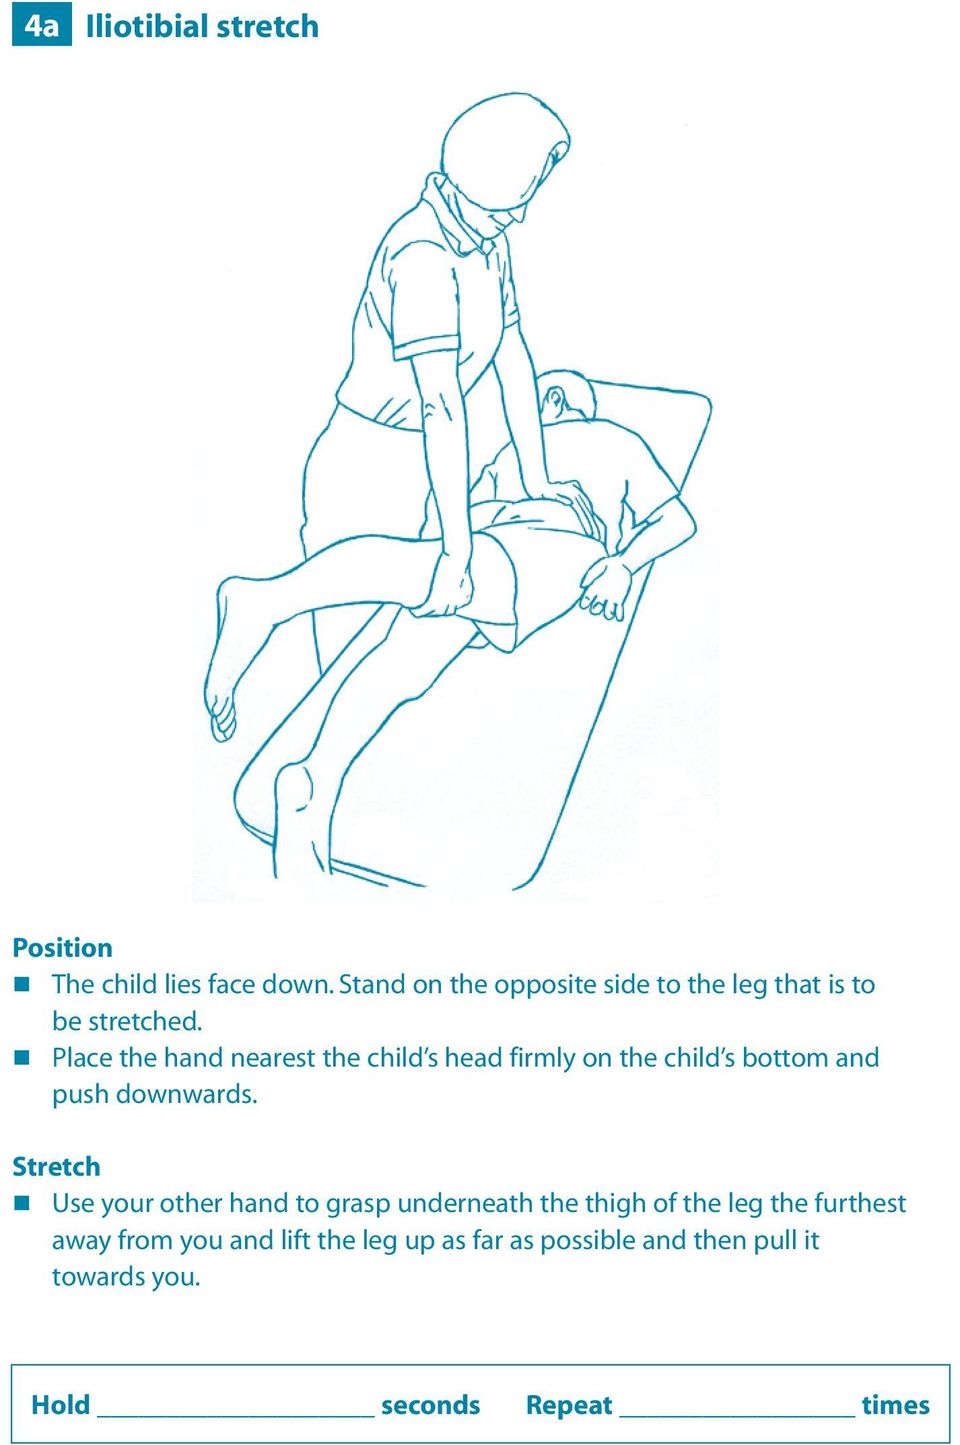 Place the hand nearest the child s head firmly on the child s bottom and push downwards.